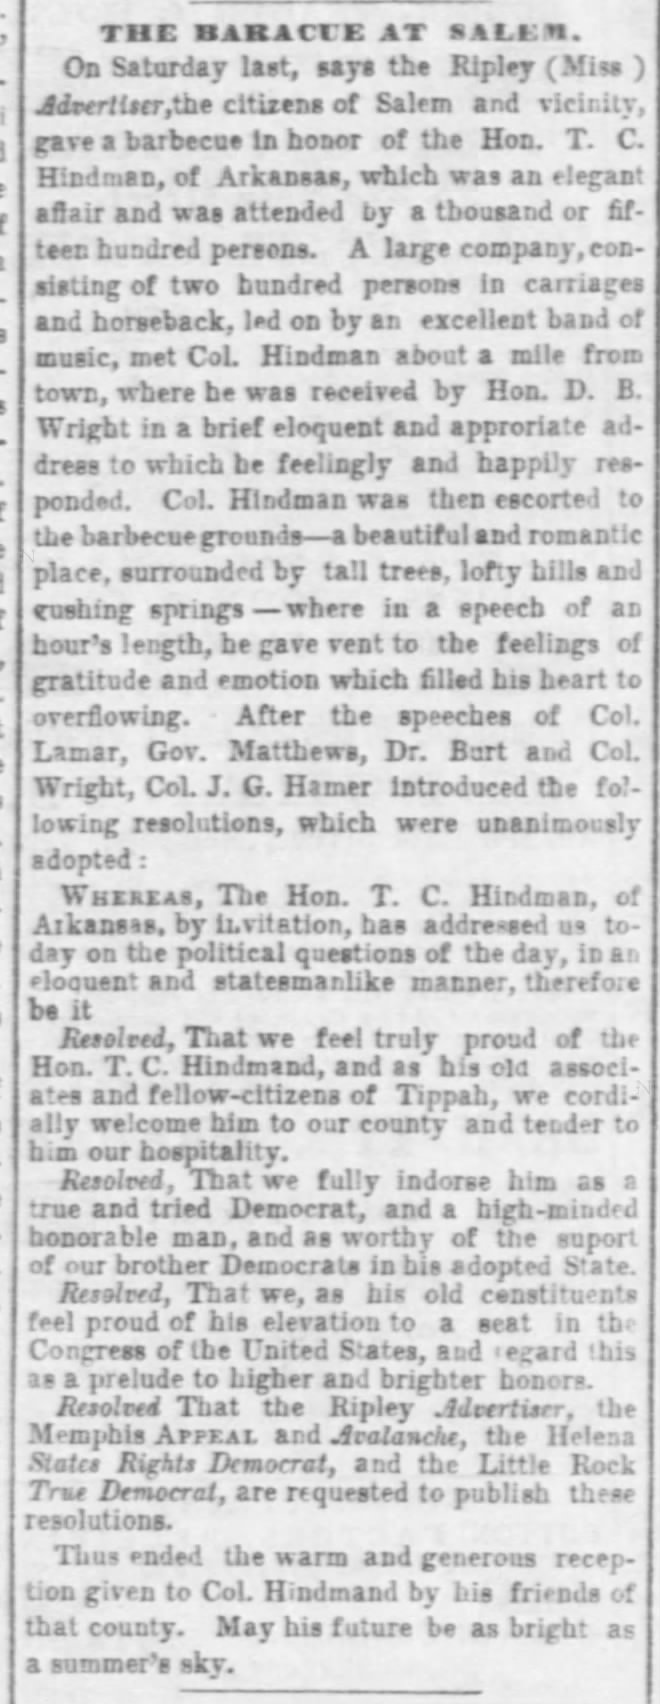 Memphis Daily Appeal Memphis, Tennessee
Saturday, August 27, 1859 p2 
